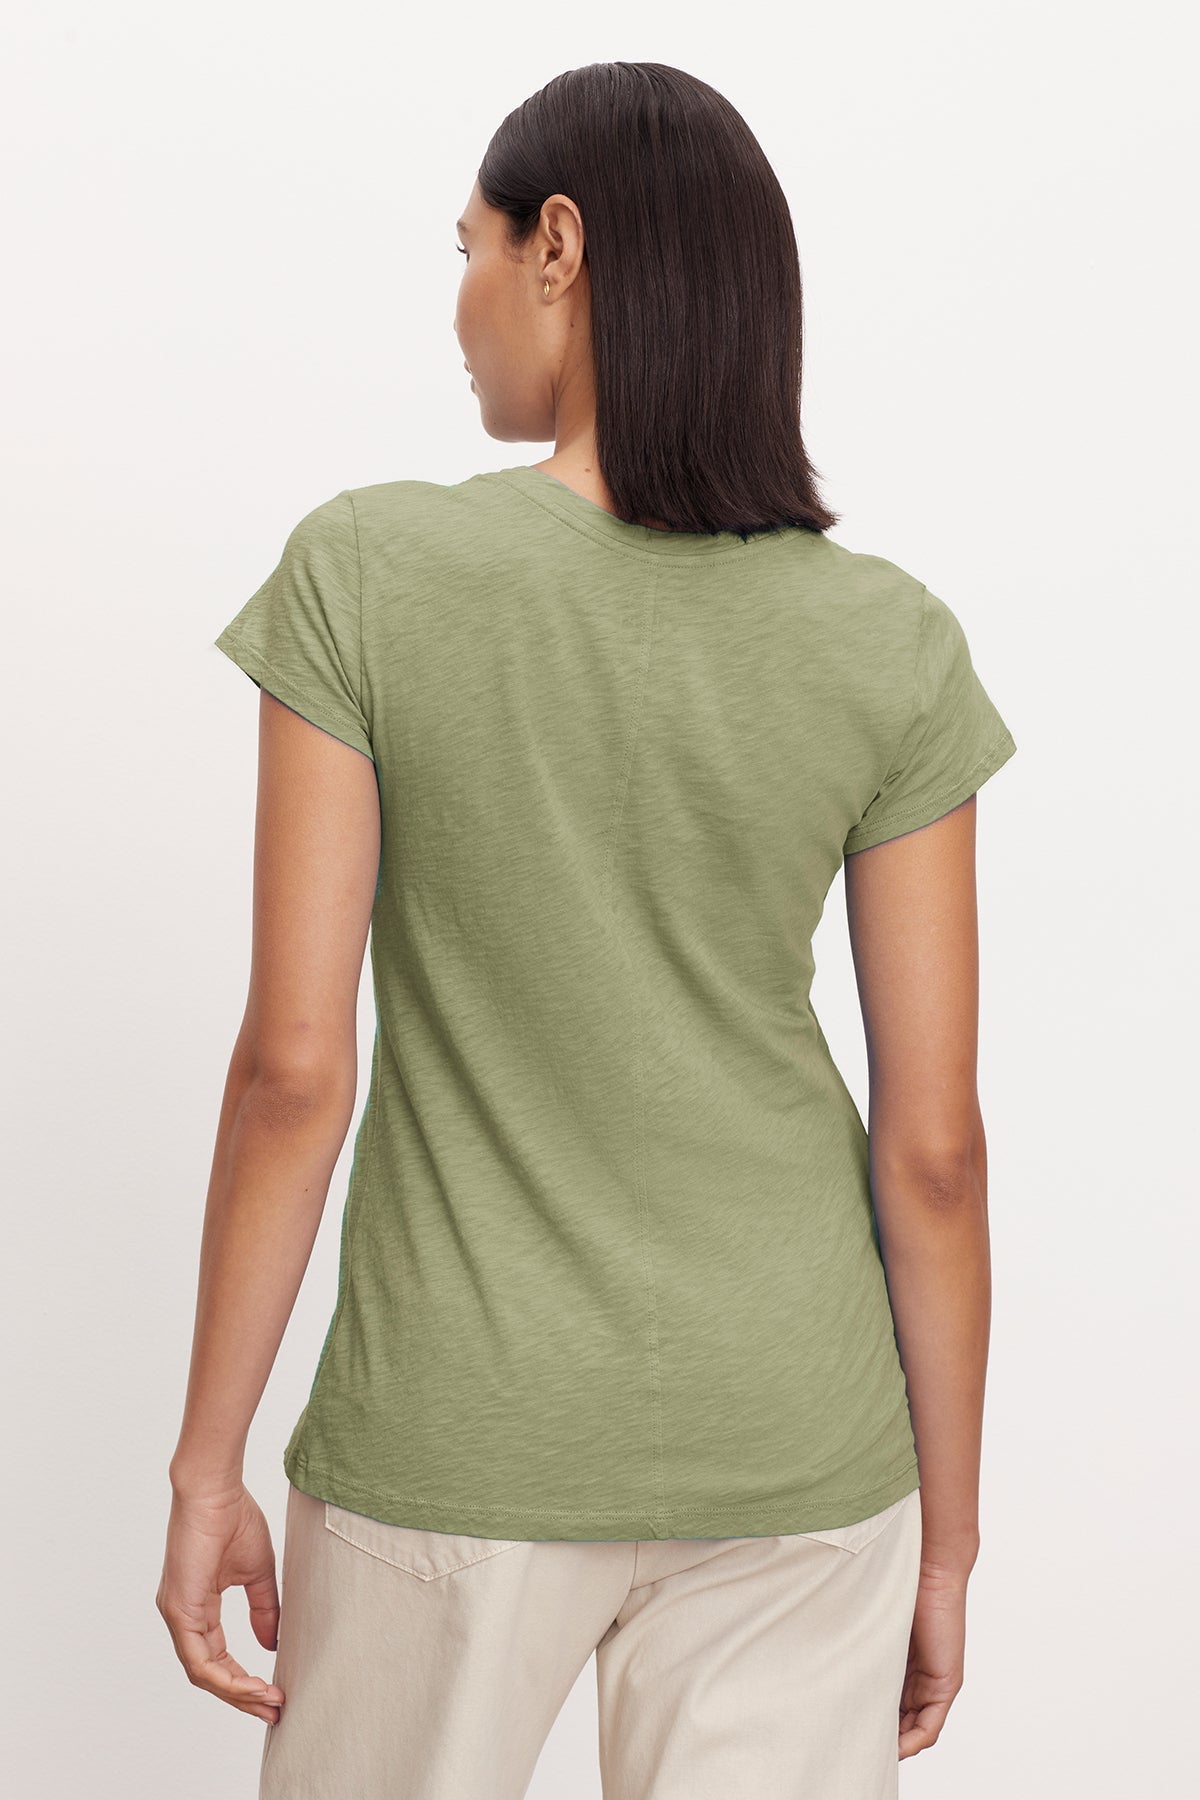   The back view of a woman wearing a Velvet by Graham & Spencer ODELIA COTTON SLUB CREW NECK TEE. 